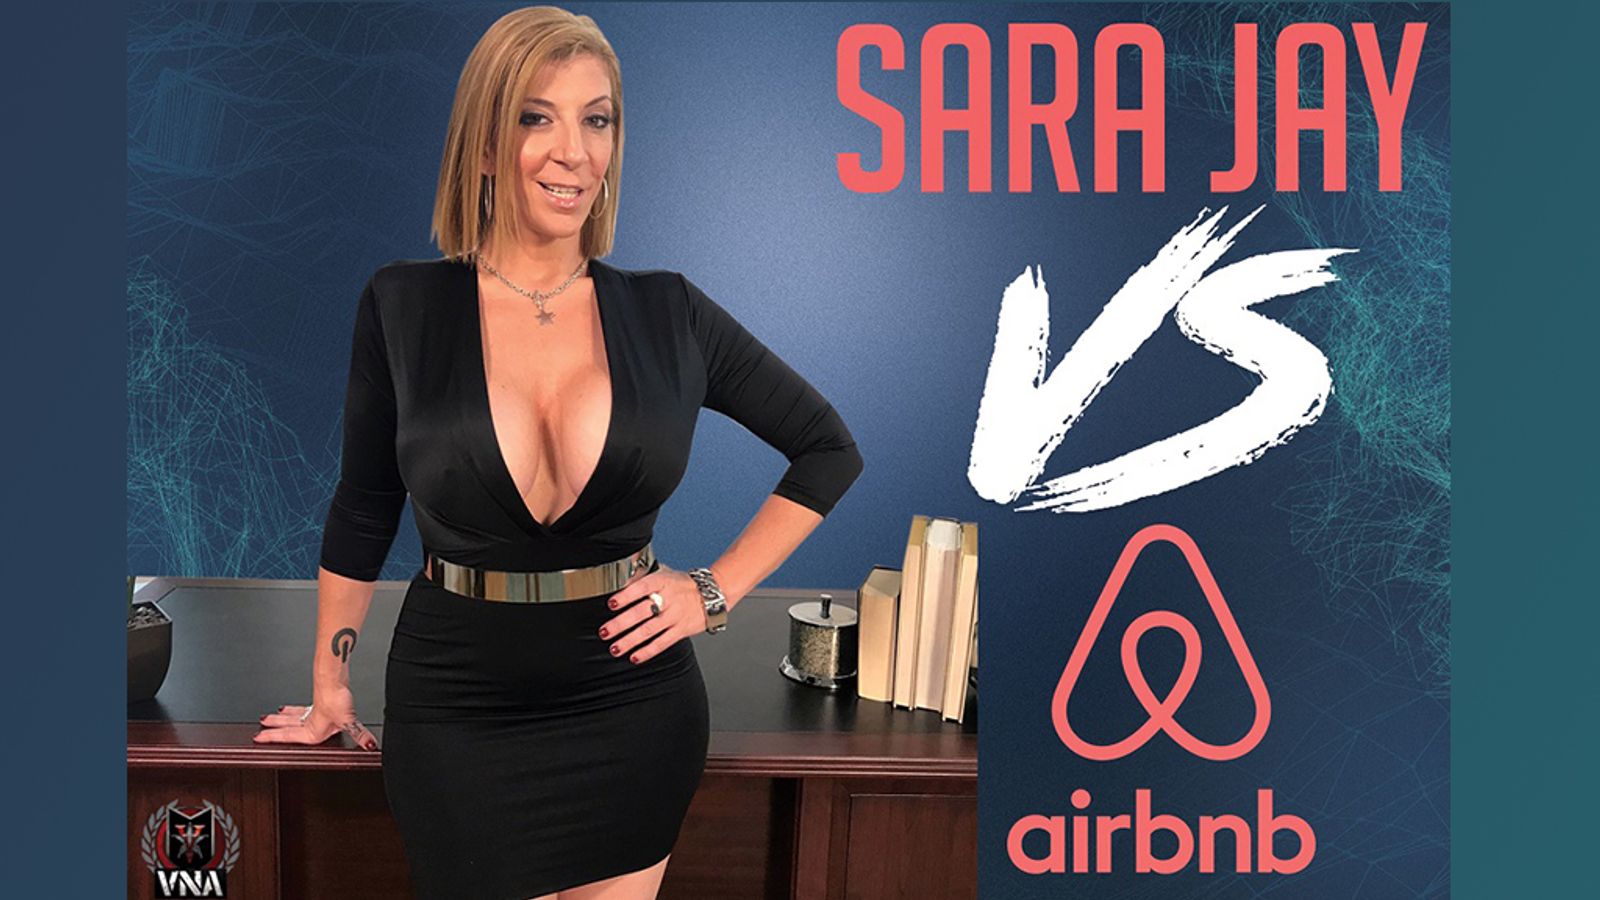 Airbnb Blackballed Sara Jay. Why? For Being An Adult Actress!